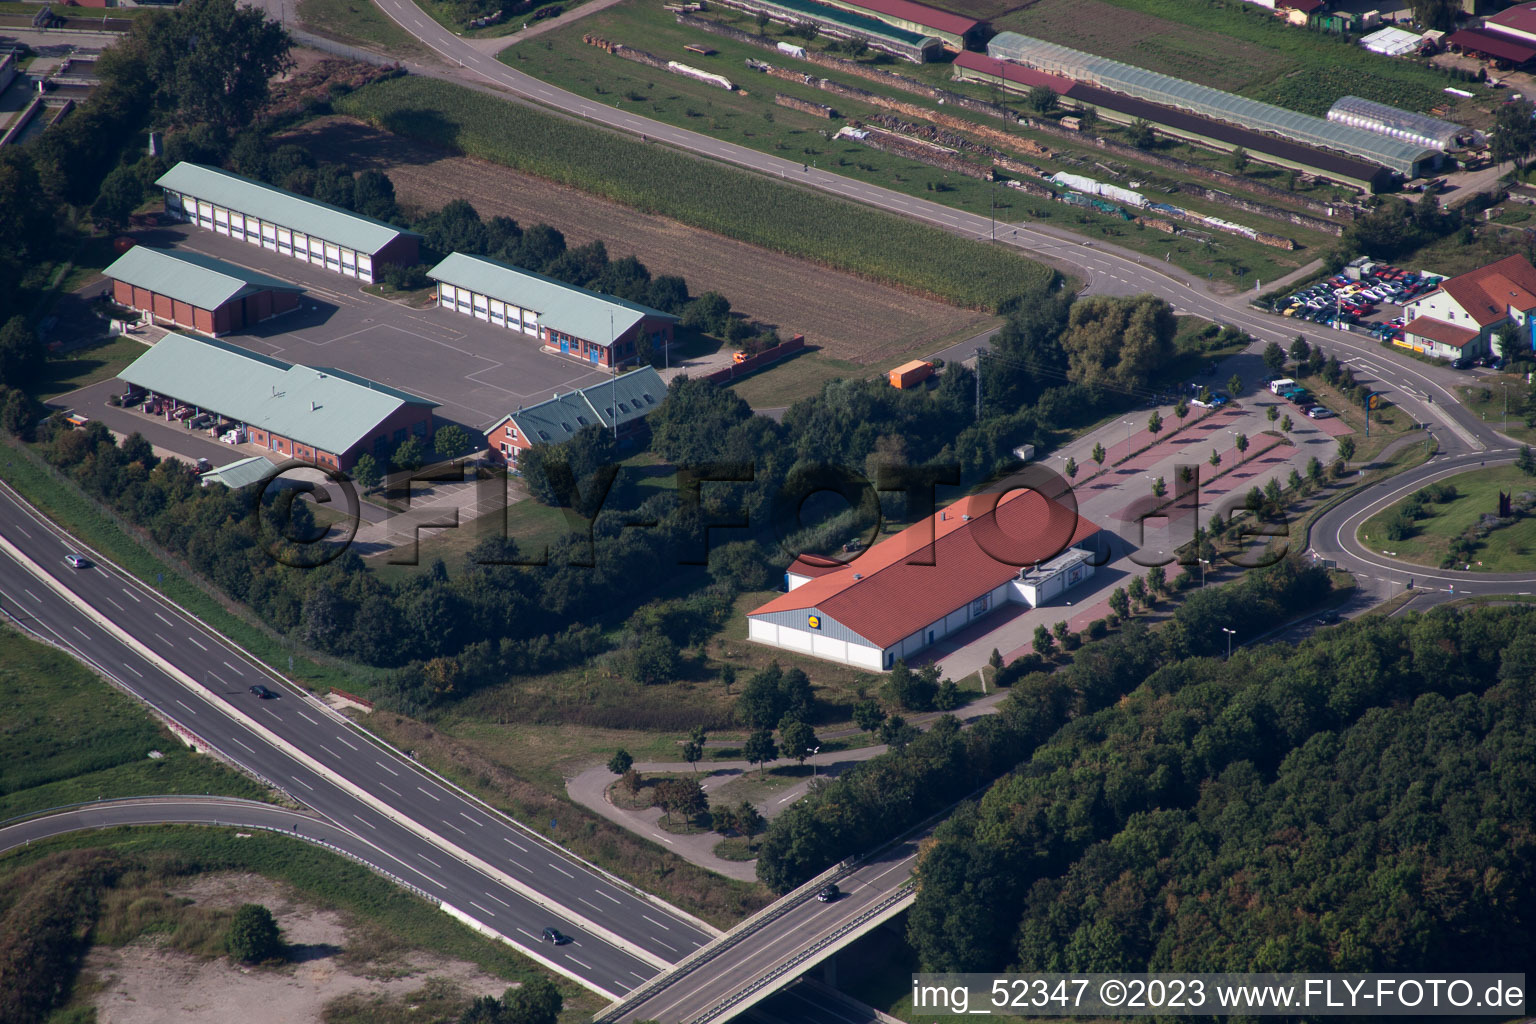 Aerial view of Highway maintenance sewage treatment plant in Kandel in the state Rhineland-Palatinate, Germany